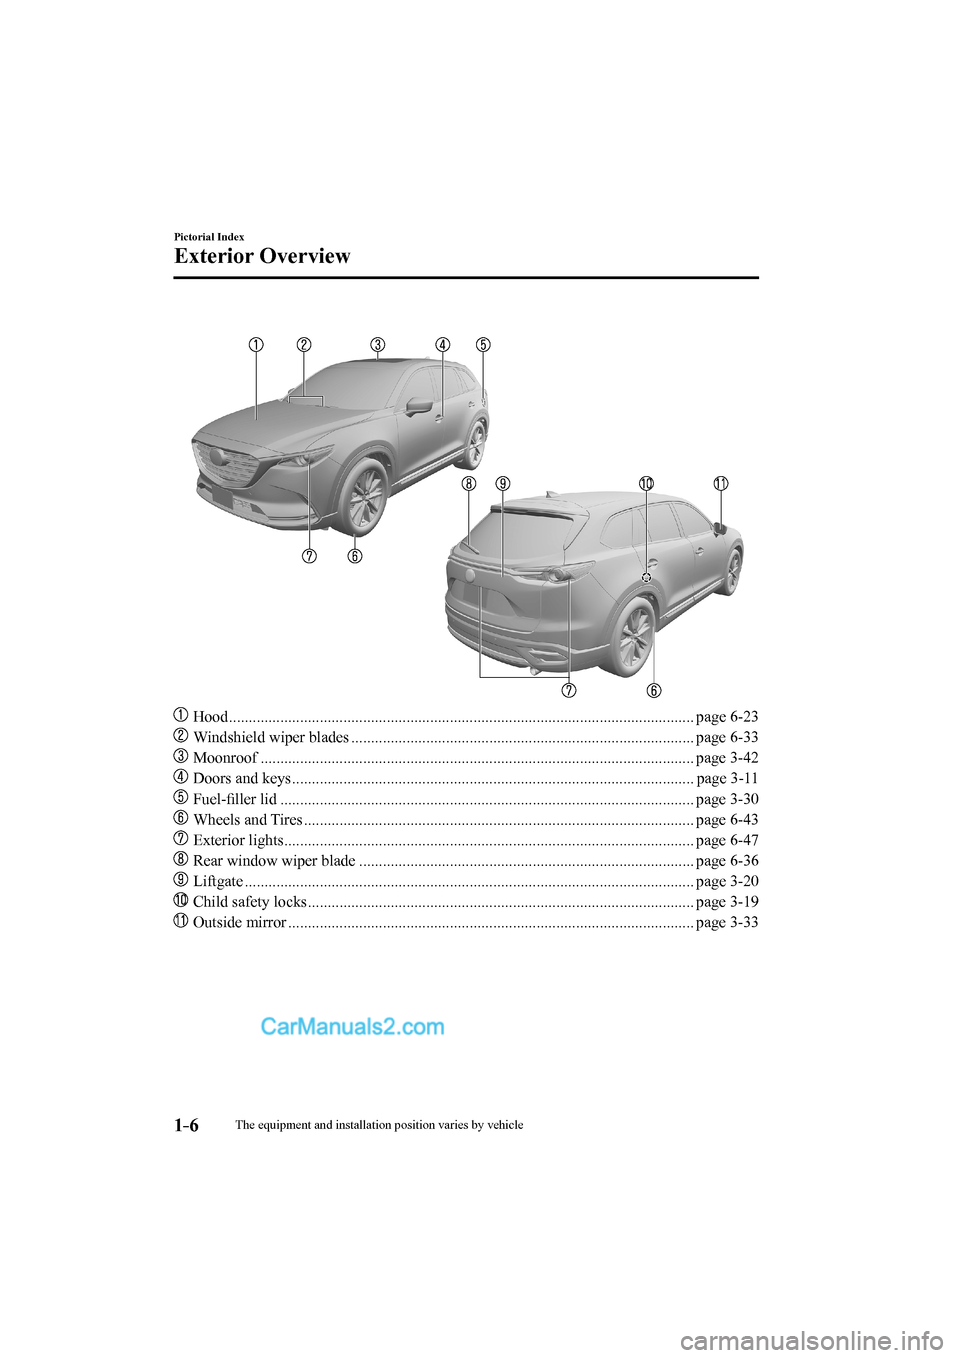 MAZDA MODEL CX-9 2017   (in English) User Guide 1–6
Pictorial Index
Exterior Overview
    
���
 Hood ...................................................................................................................... page  6-23 
��
  Wind